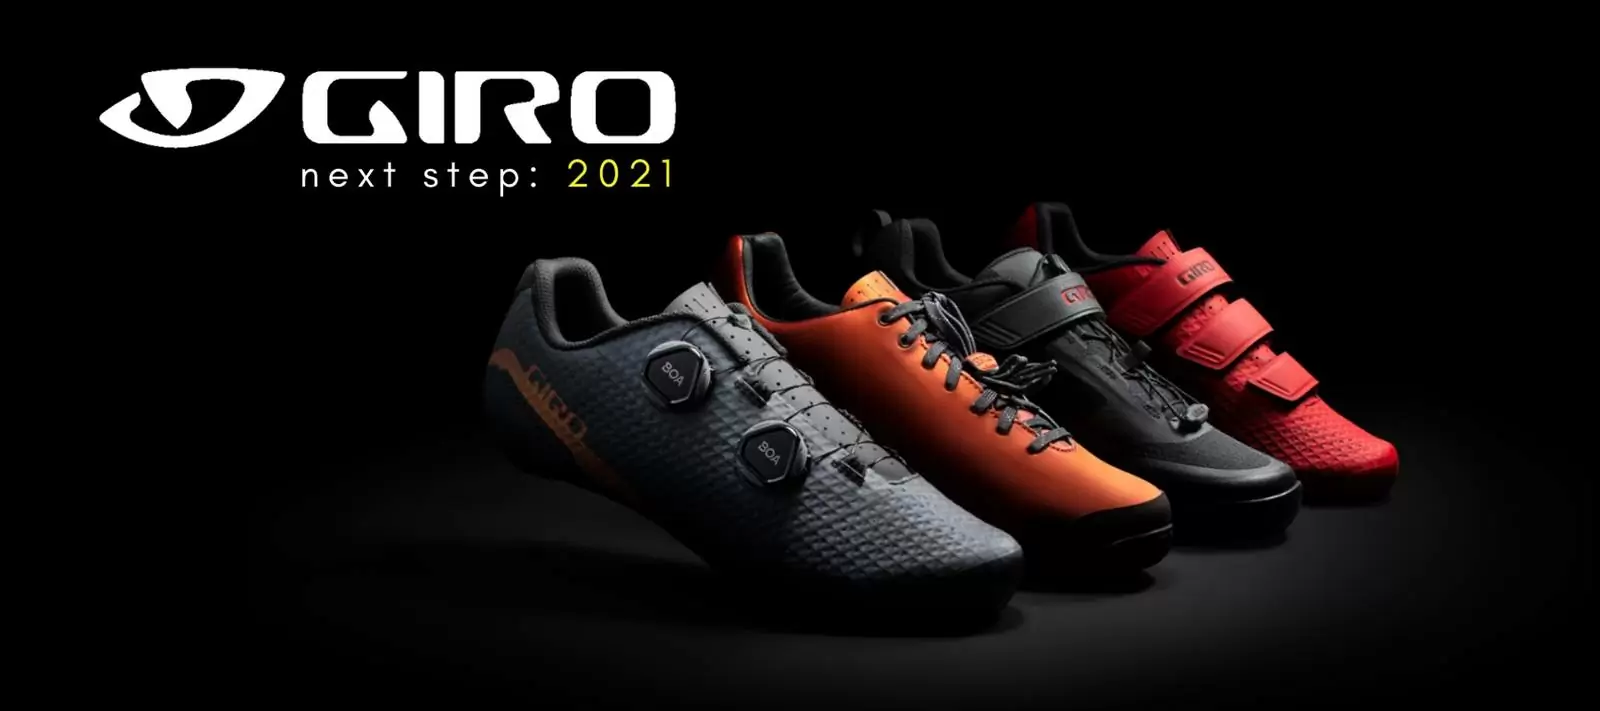 A step beyond: 2021 Giro new products - image